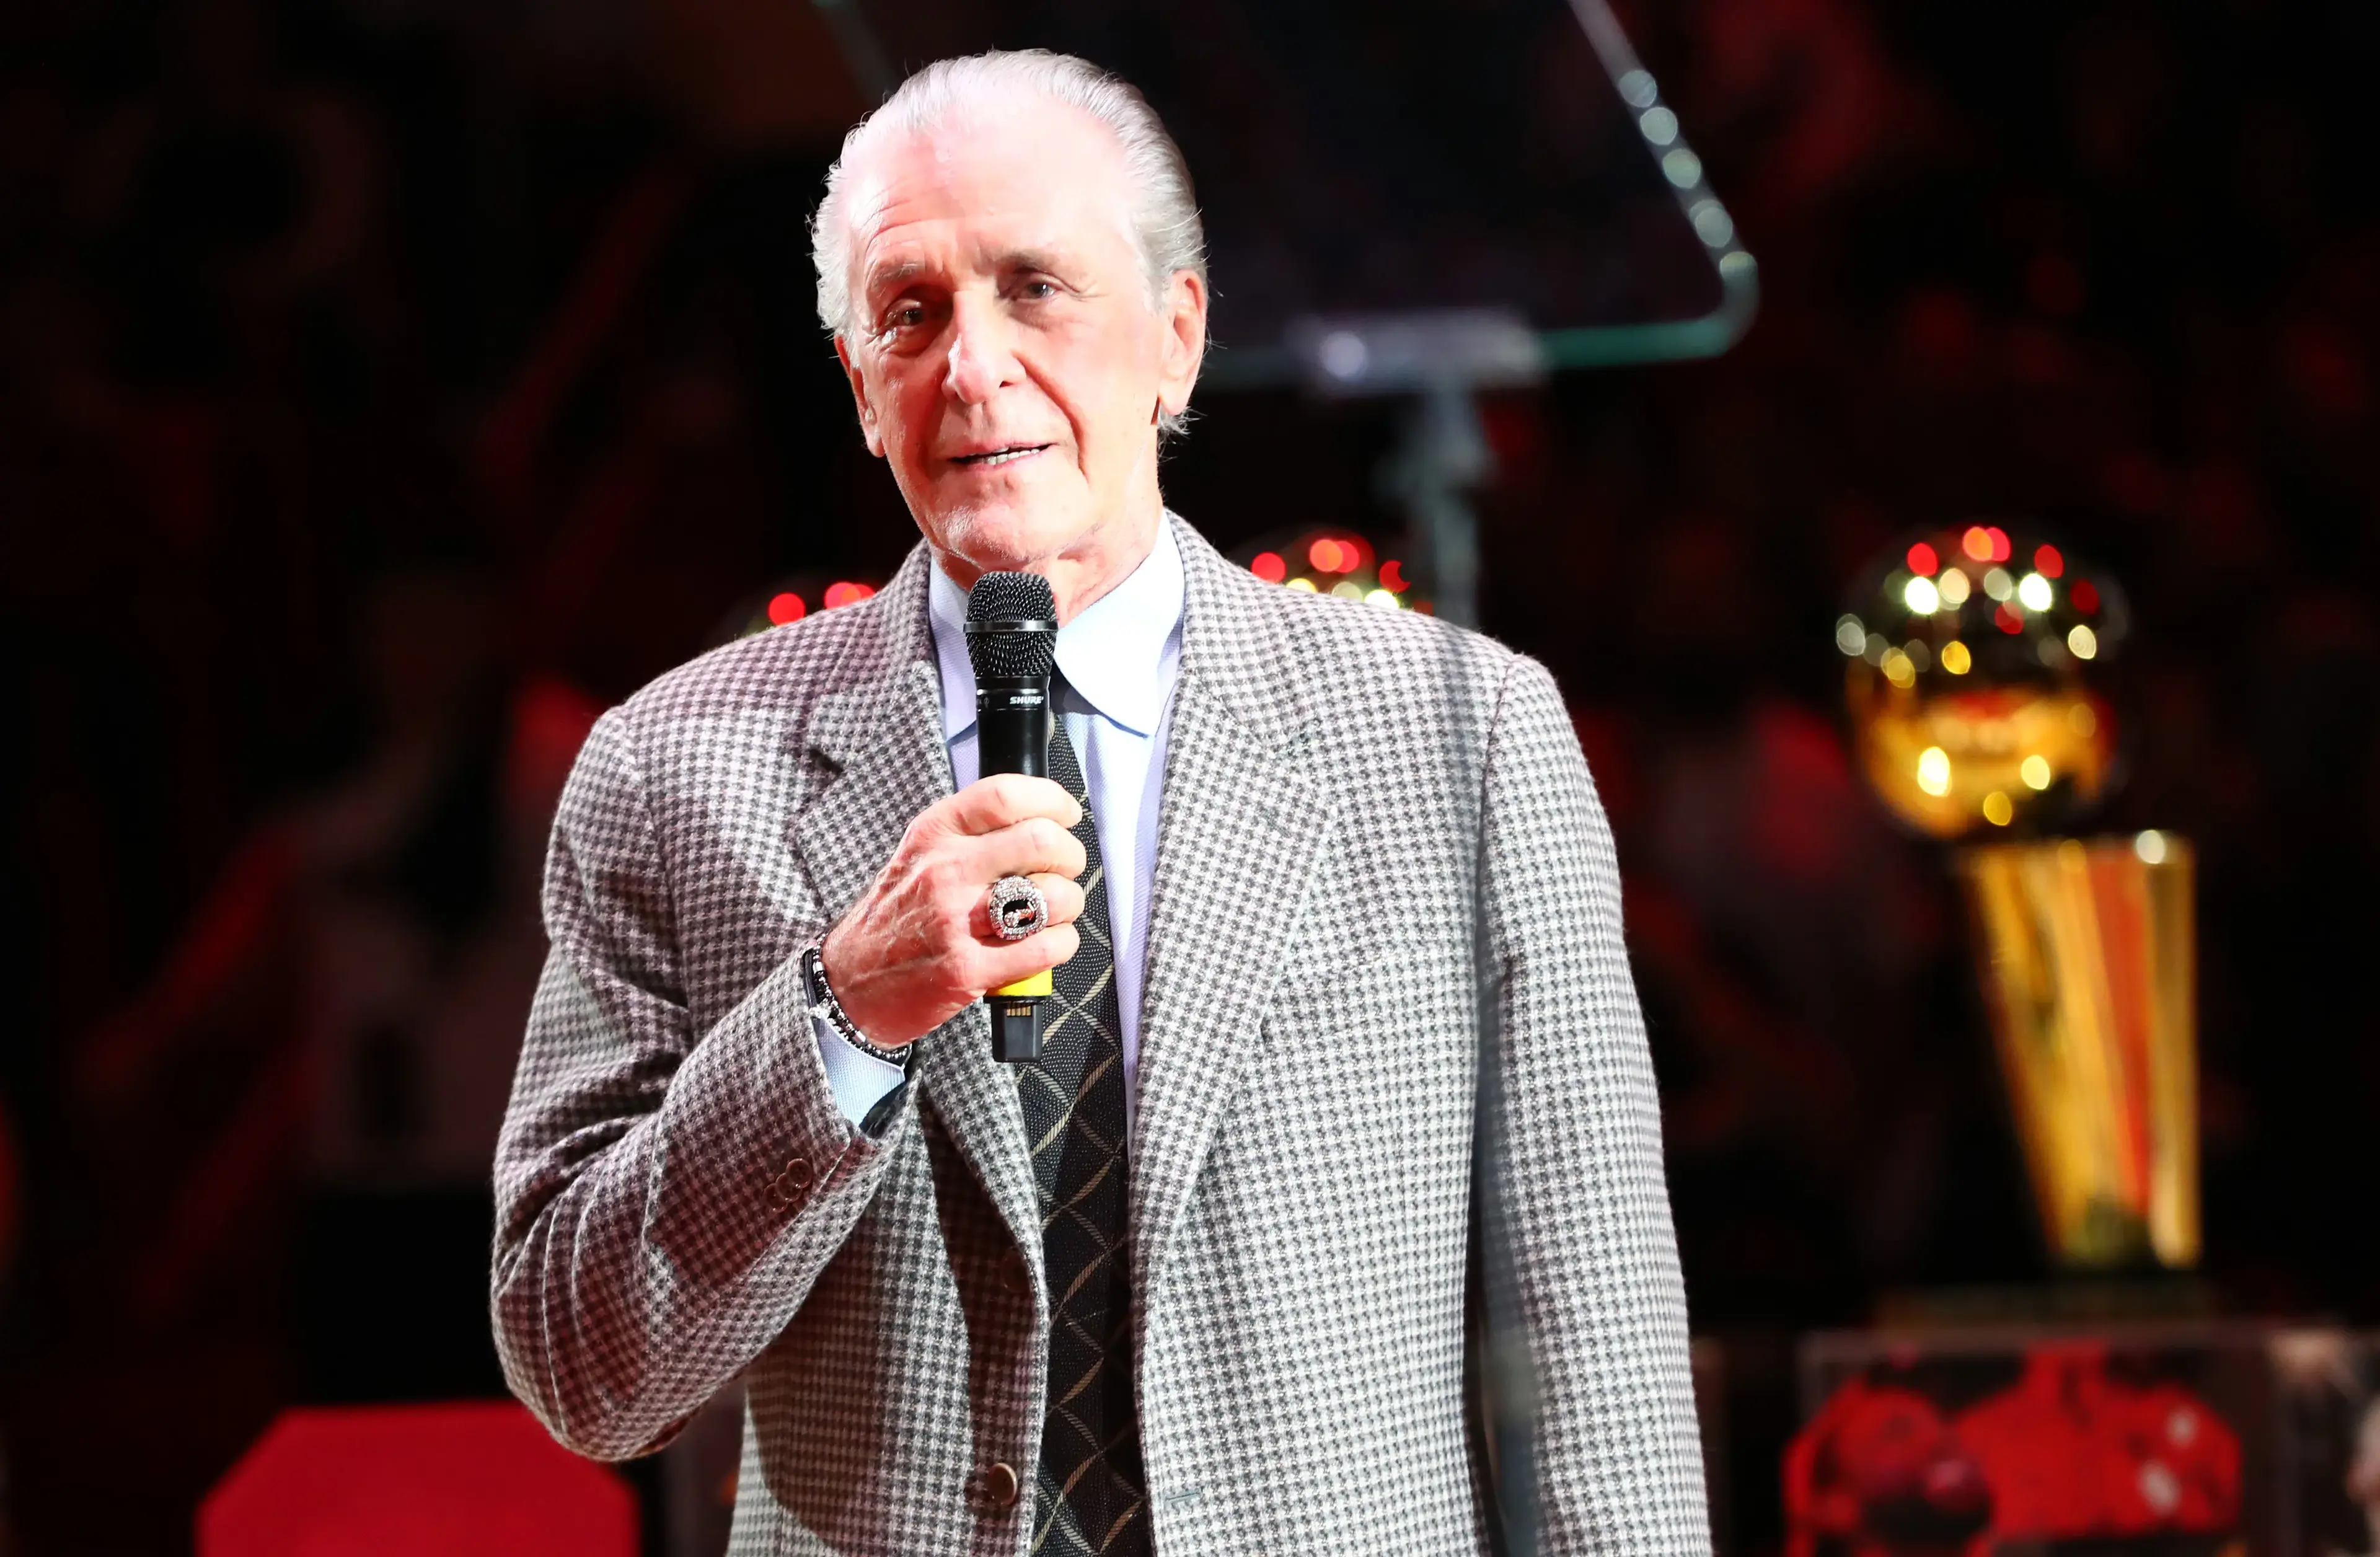 Feb 22, 2020; Miami, Florida, USA; Miami Heat president Pat Riley speaks during a jersey and number retirement ceremony for Dwyane Wade (not pictured) at American Airlines Arena. Mandatory Credit: Kim Klement-USA TODAY Sports / © Kim Klement-USA TODAY Sports